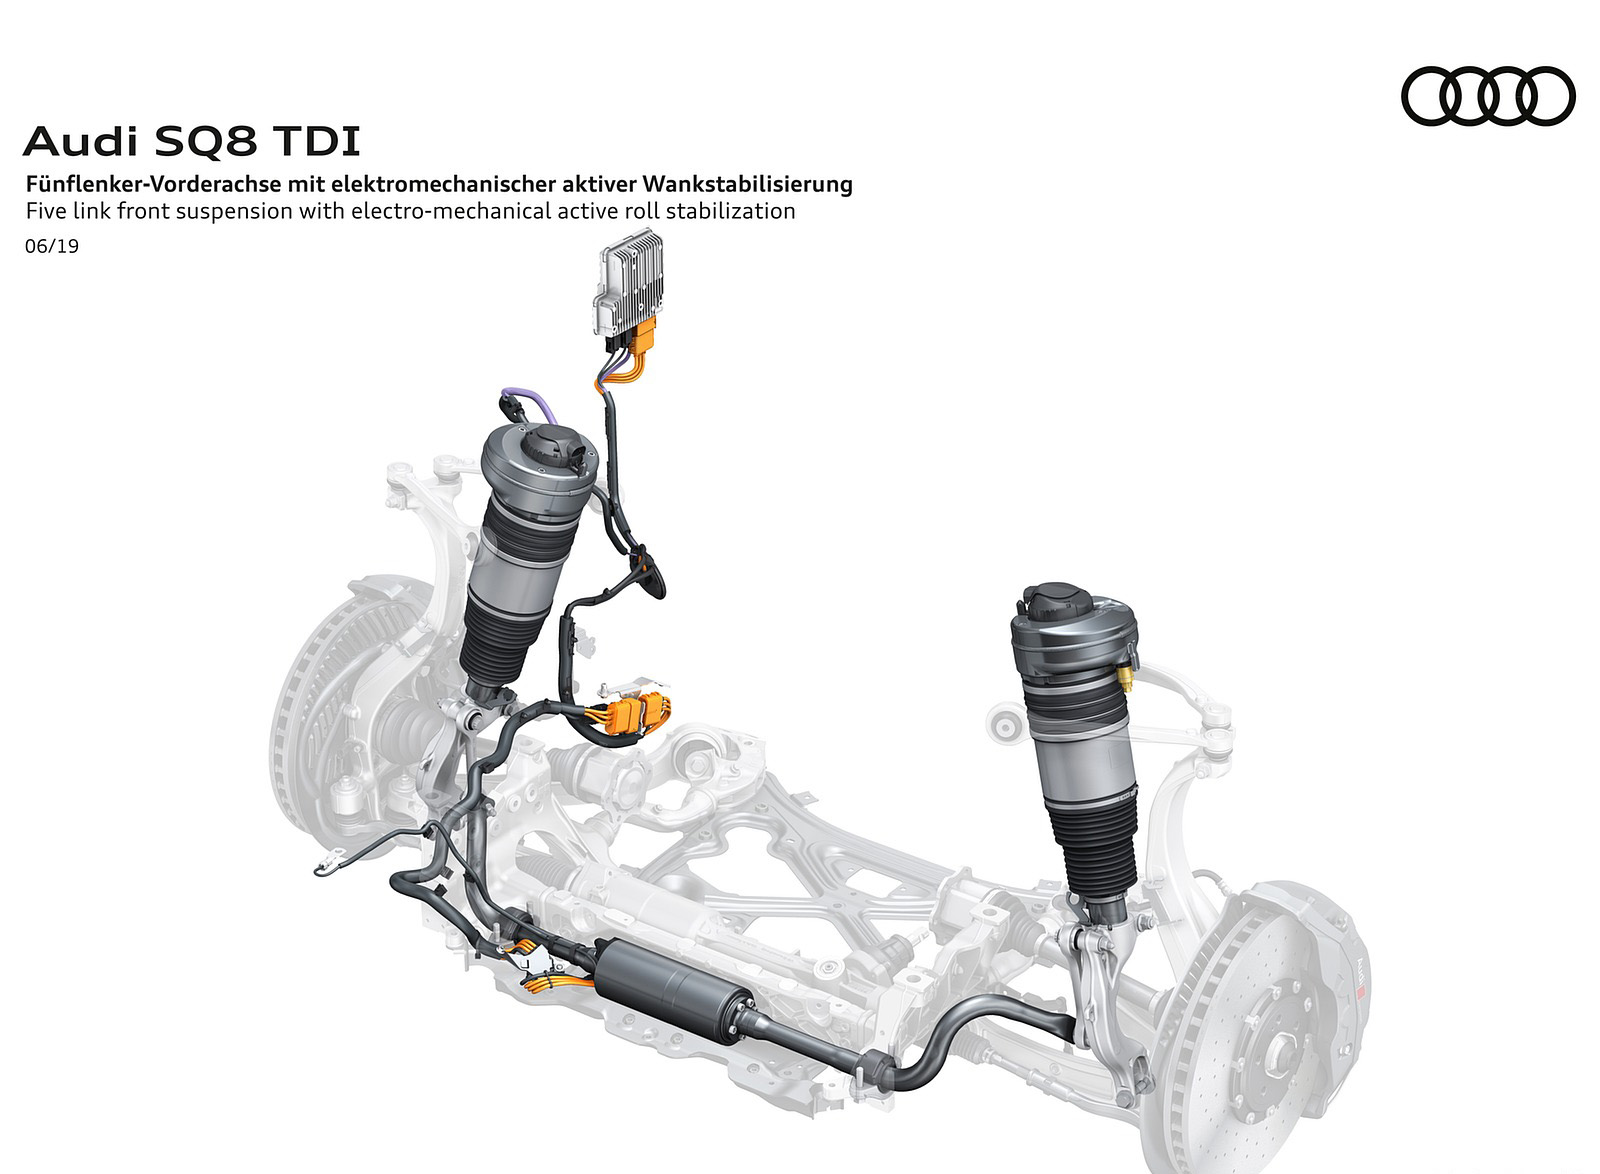 2020 Audi SQ8 TDI Five link front suspension with allwheel steering and electro-mechanical active roll stabilization Wallpapers #65 of 140